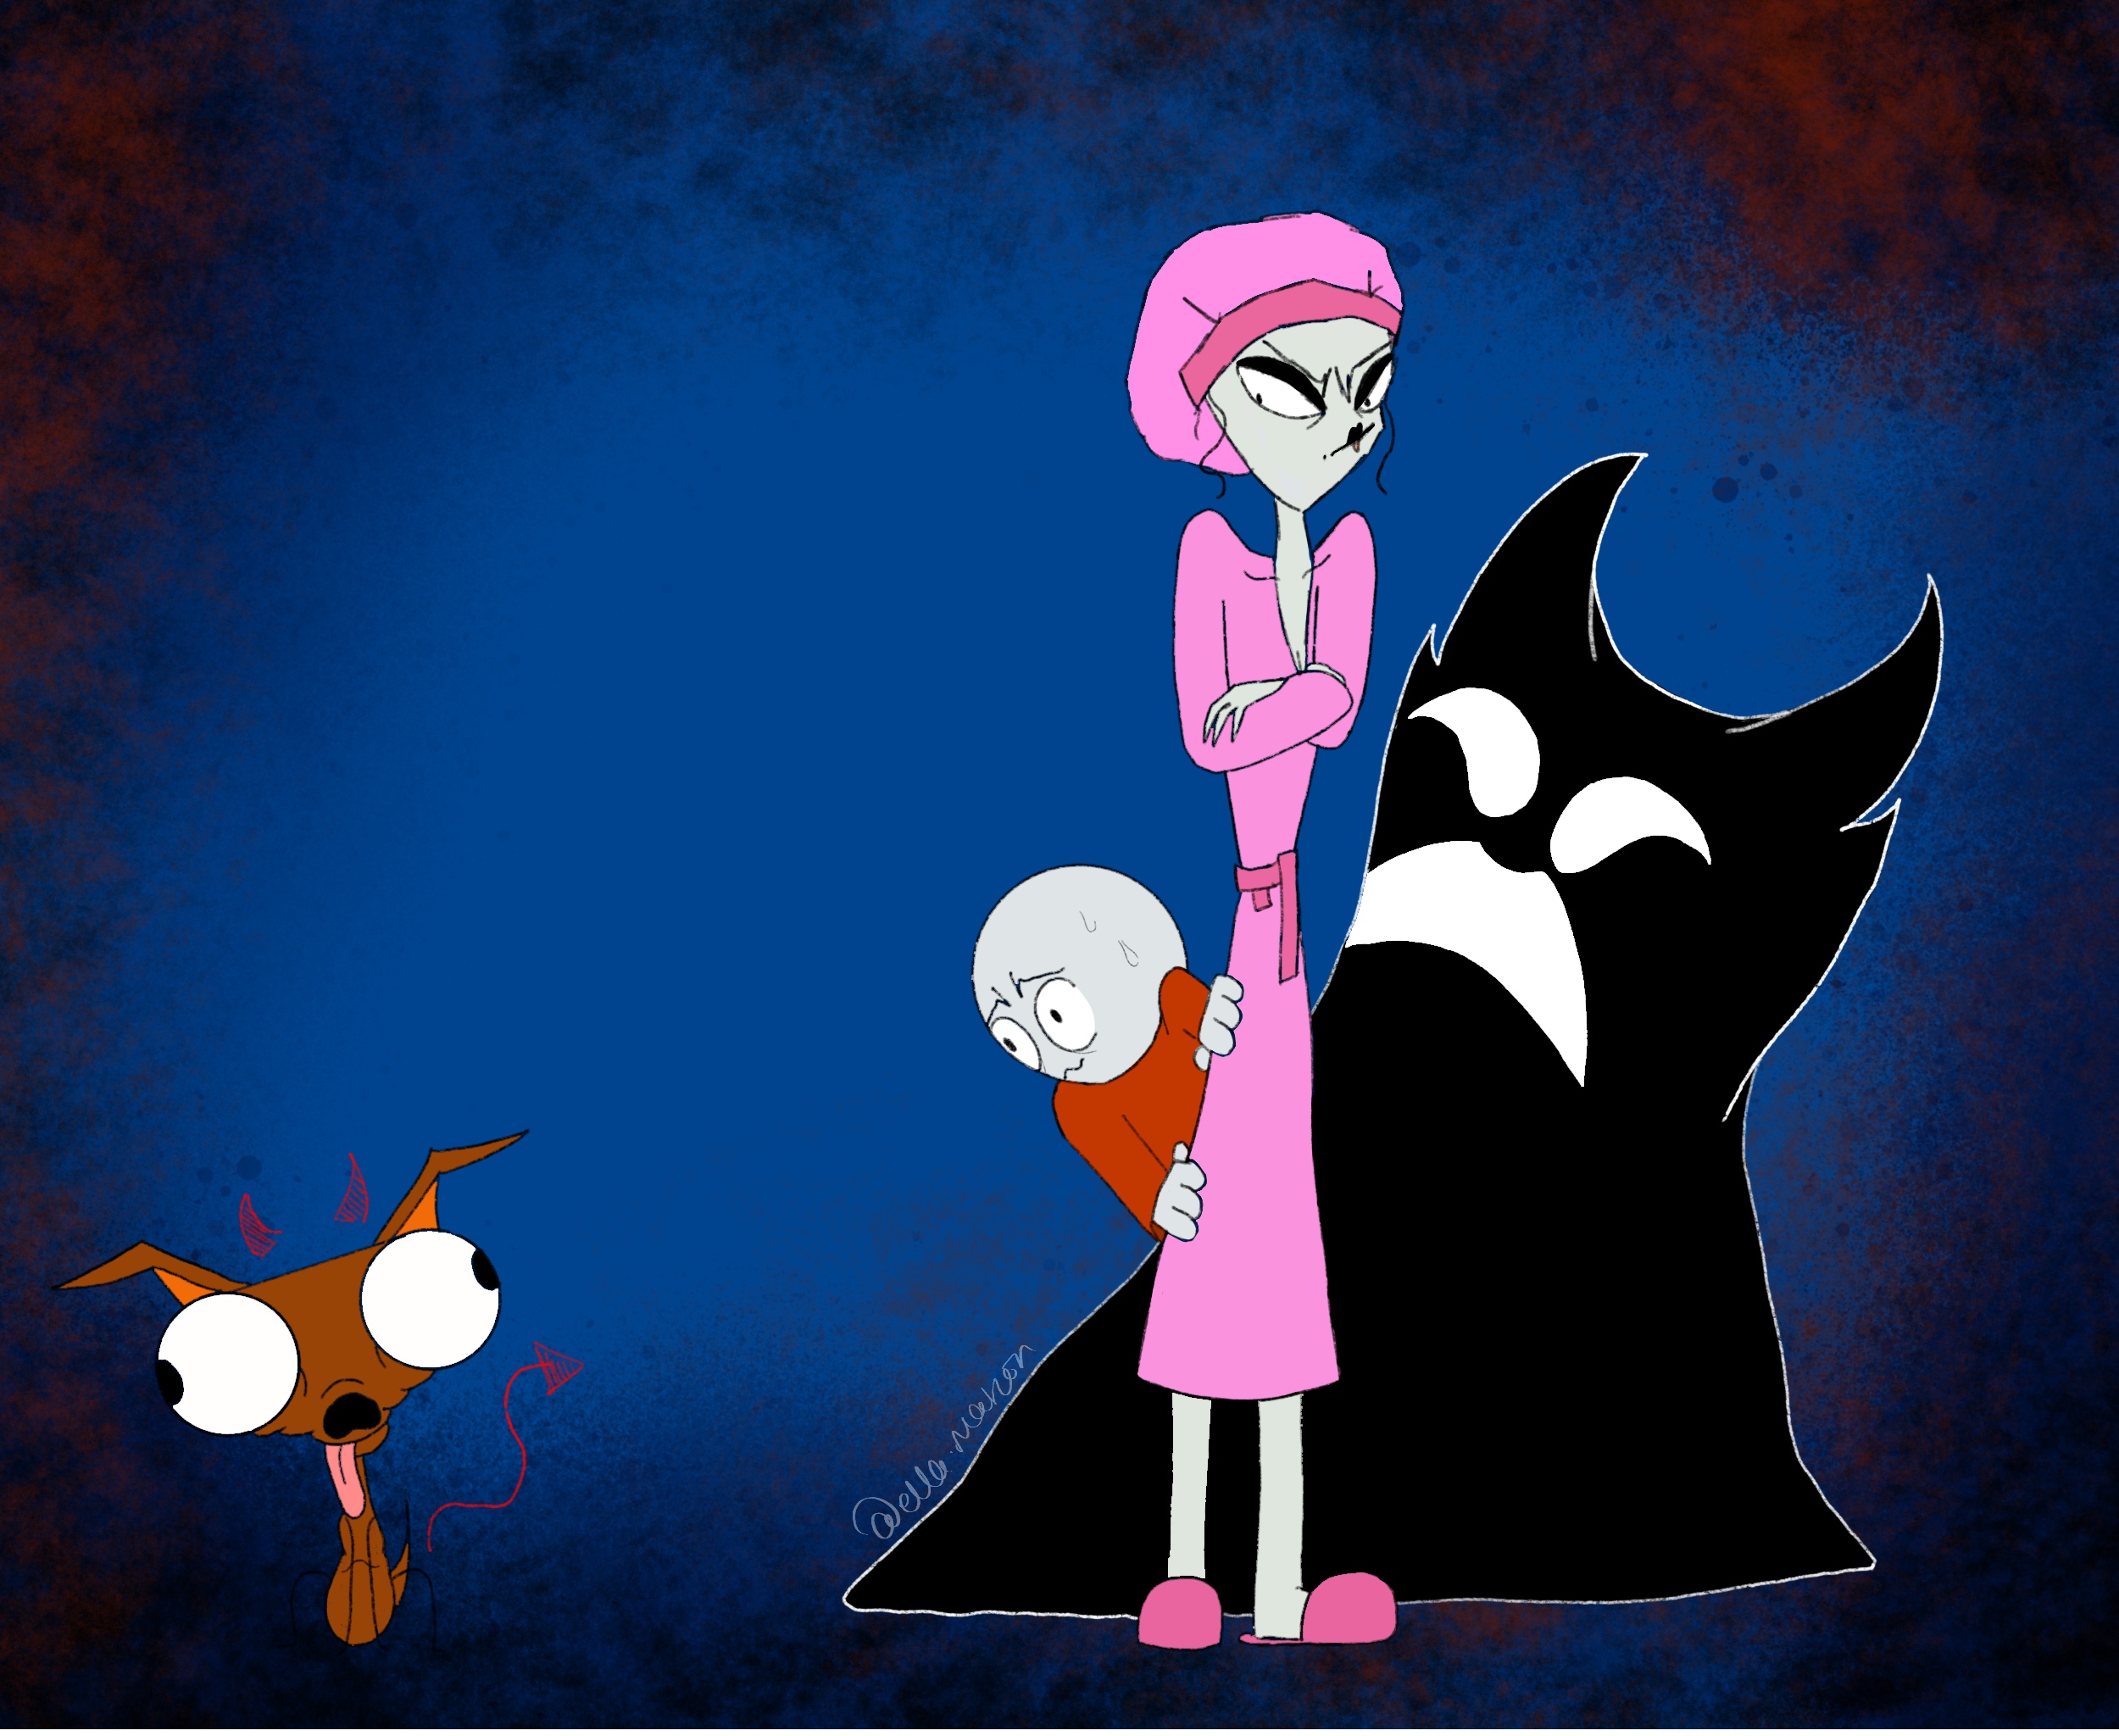 A drawing of a cartoon family that includes a young boy, mother, a shadow figure and a dog.